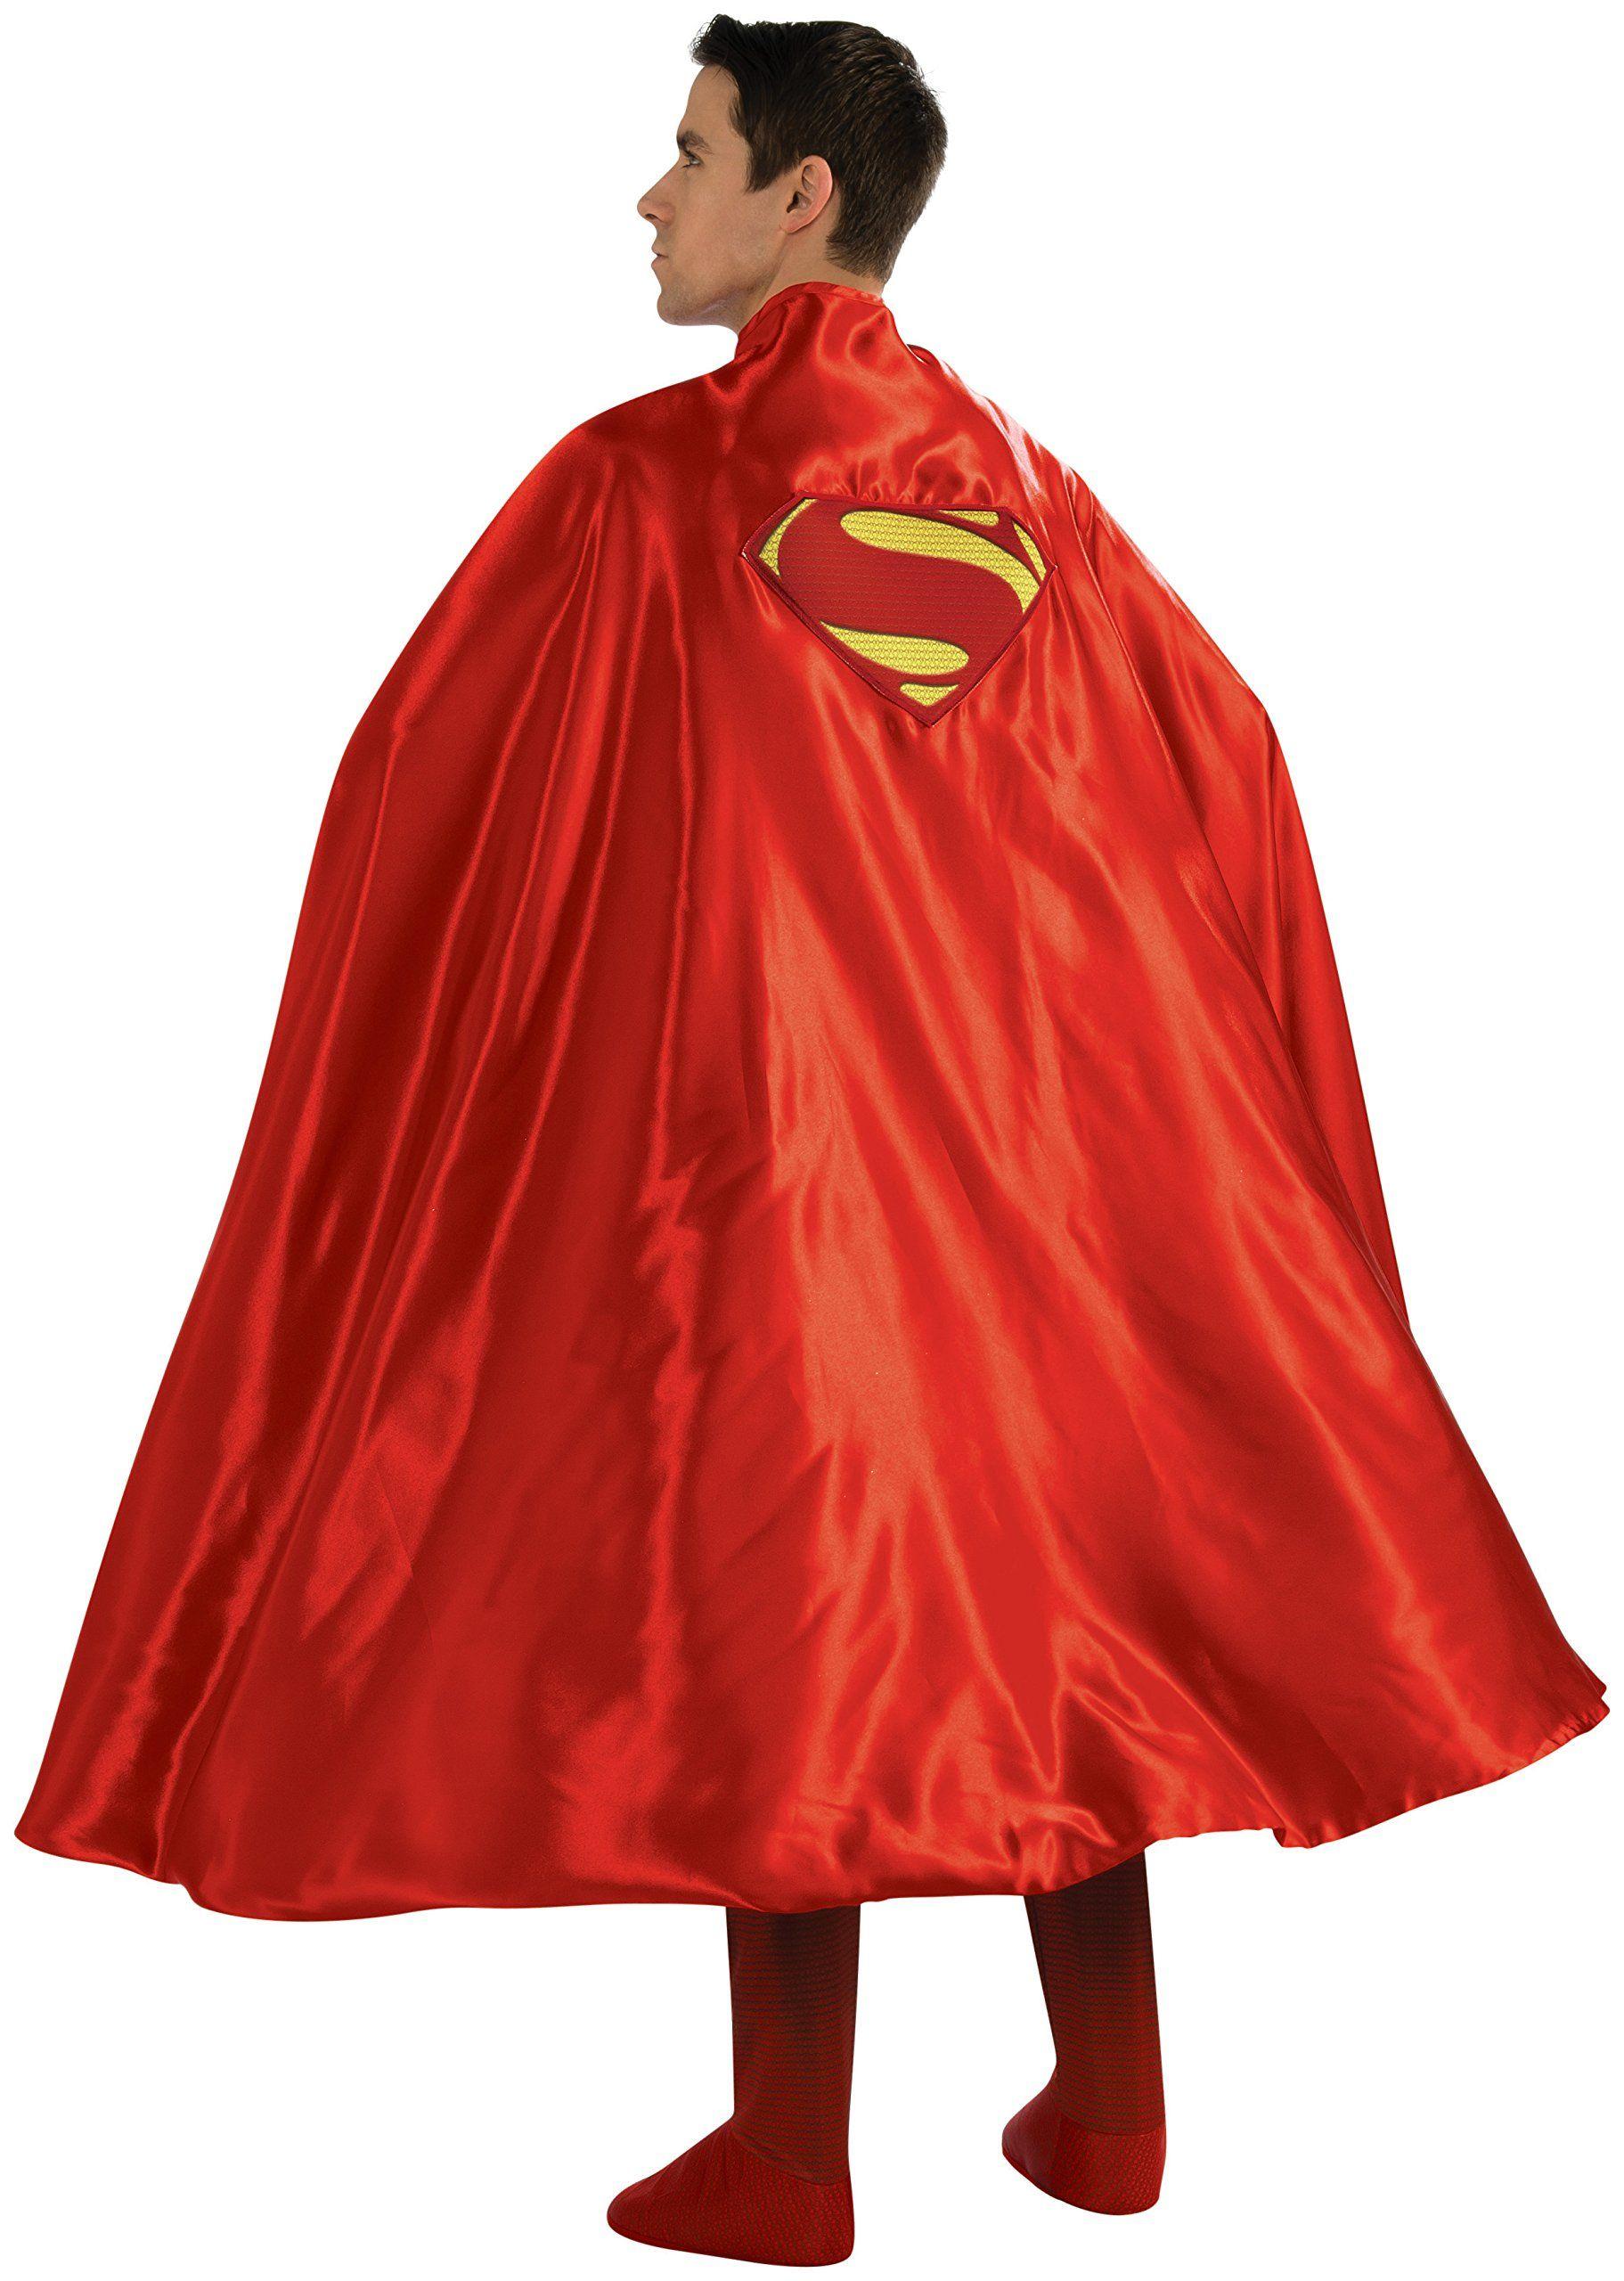 Halloween Superman Logo - Amazon.com: Rubie's Costume Deluxe Adult Cape with Embroidered ...